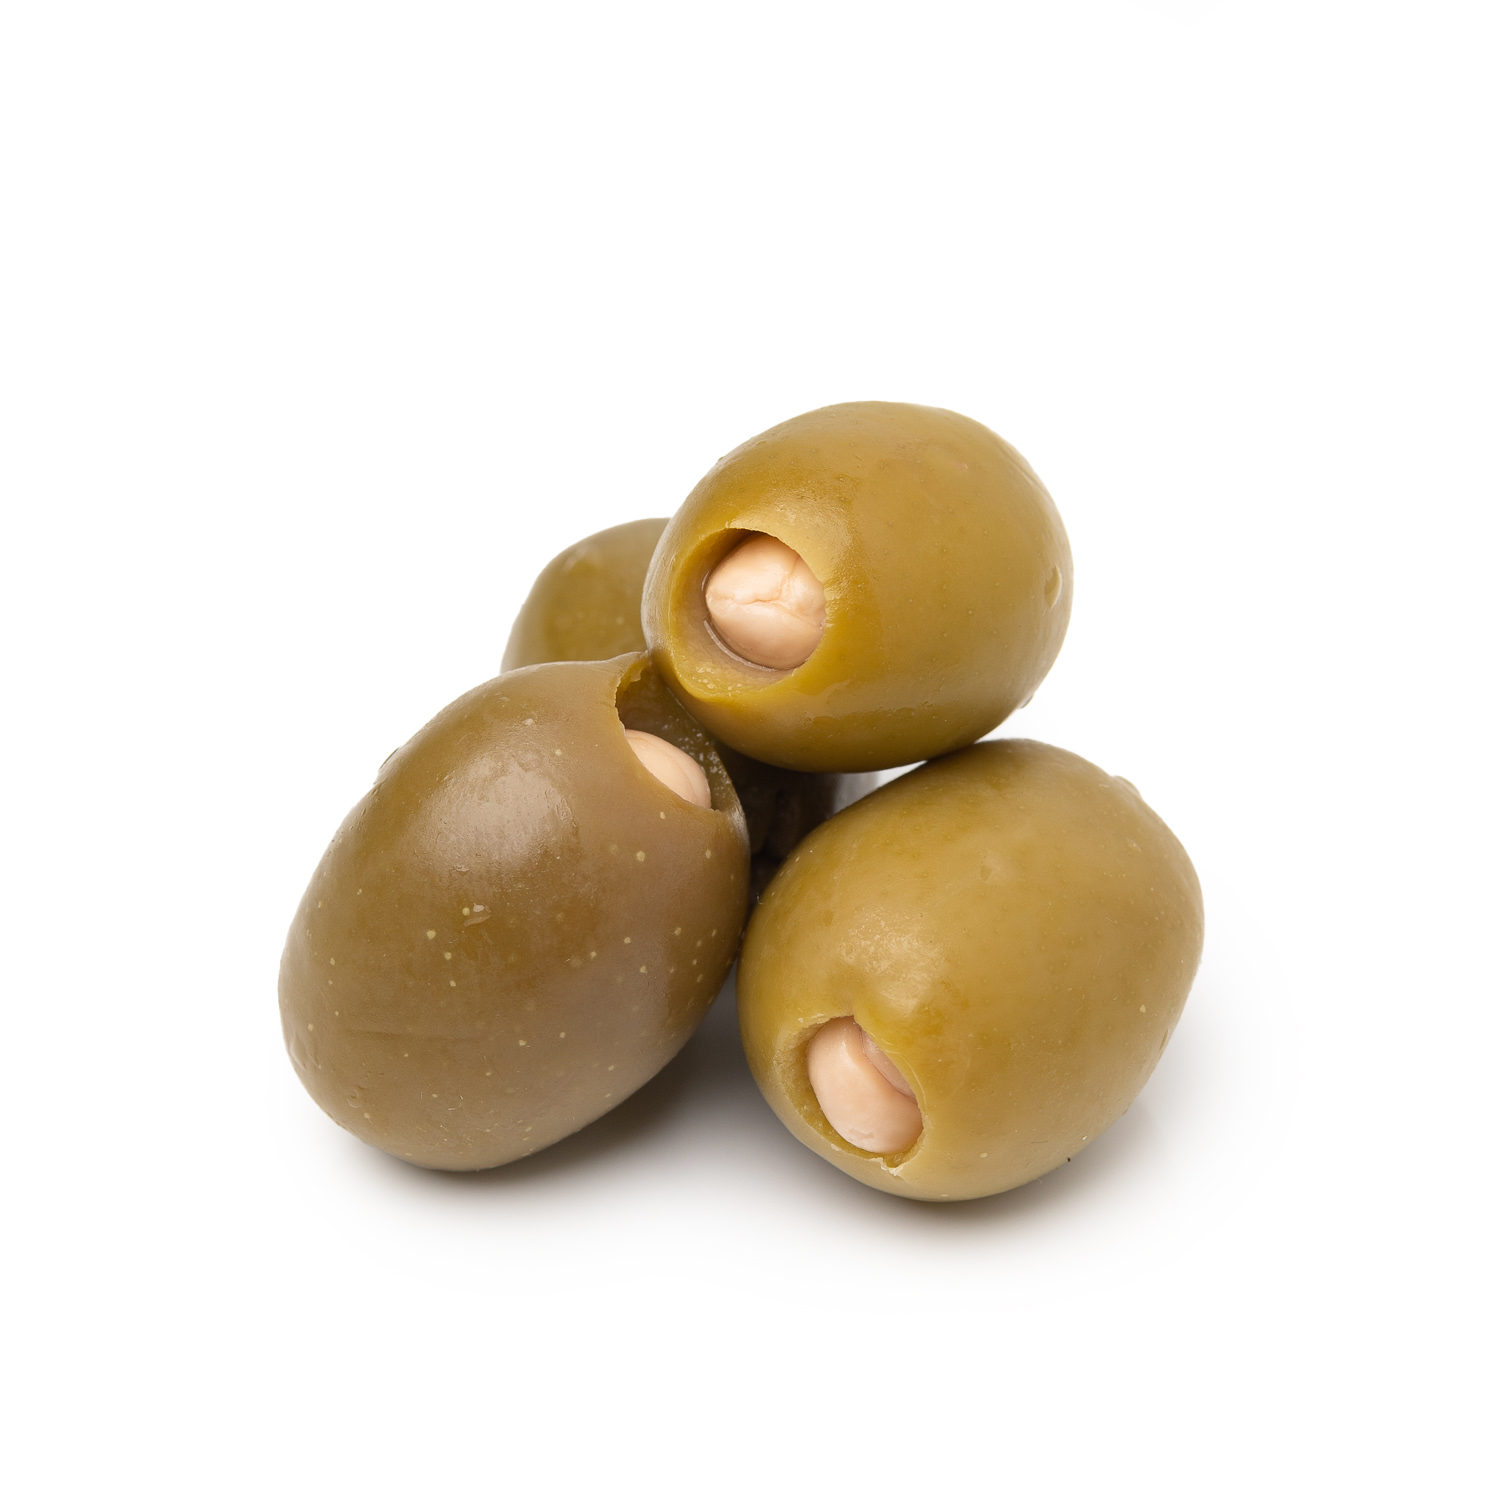 Green Olives with Almond